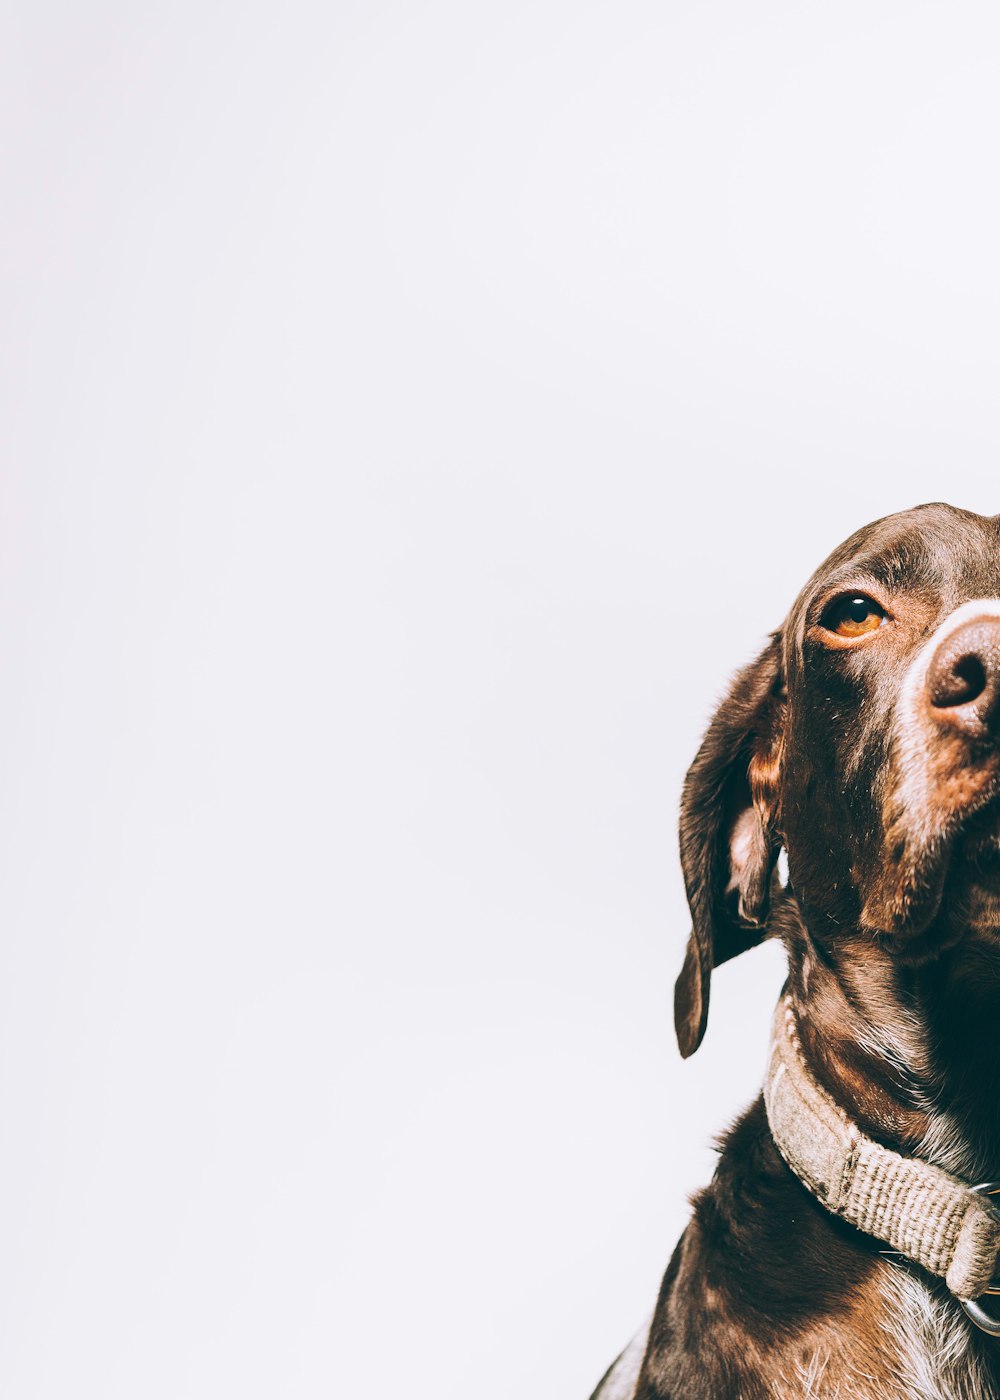 Rescue Dog Pictures | Download Free Images on Unsplash